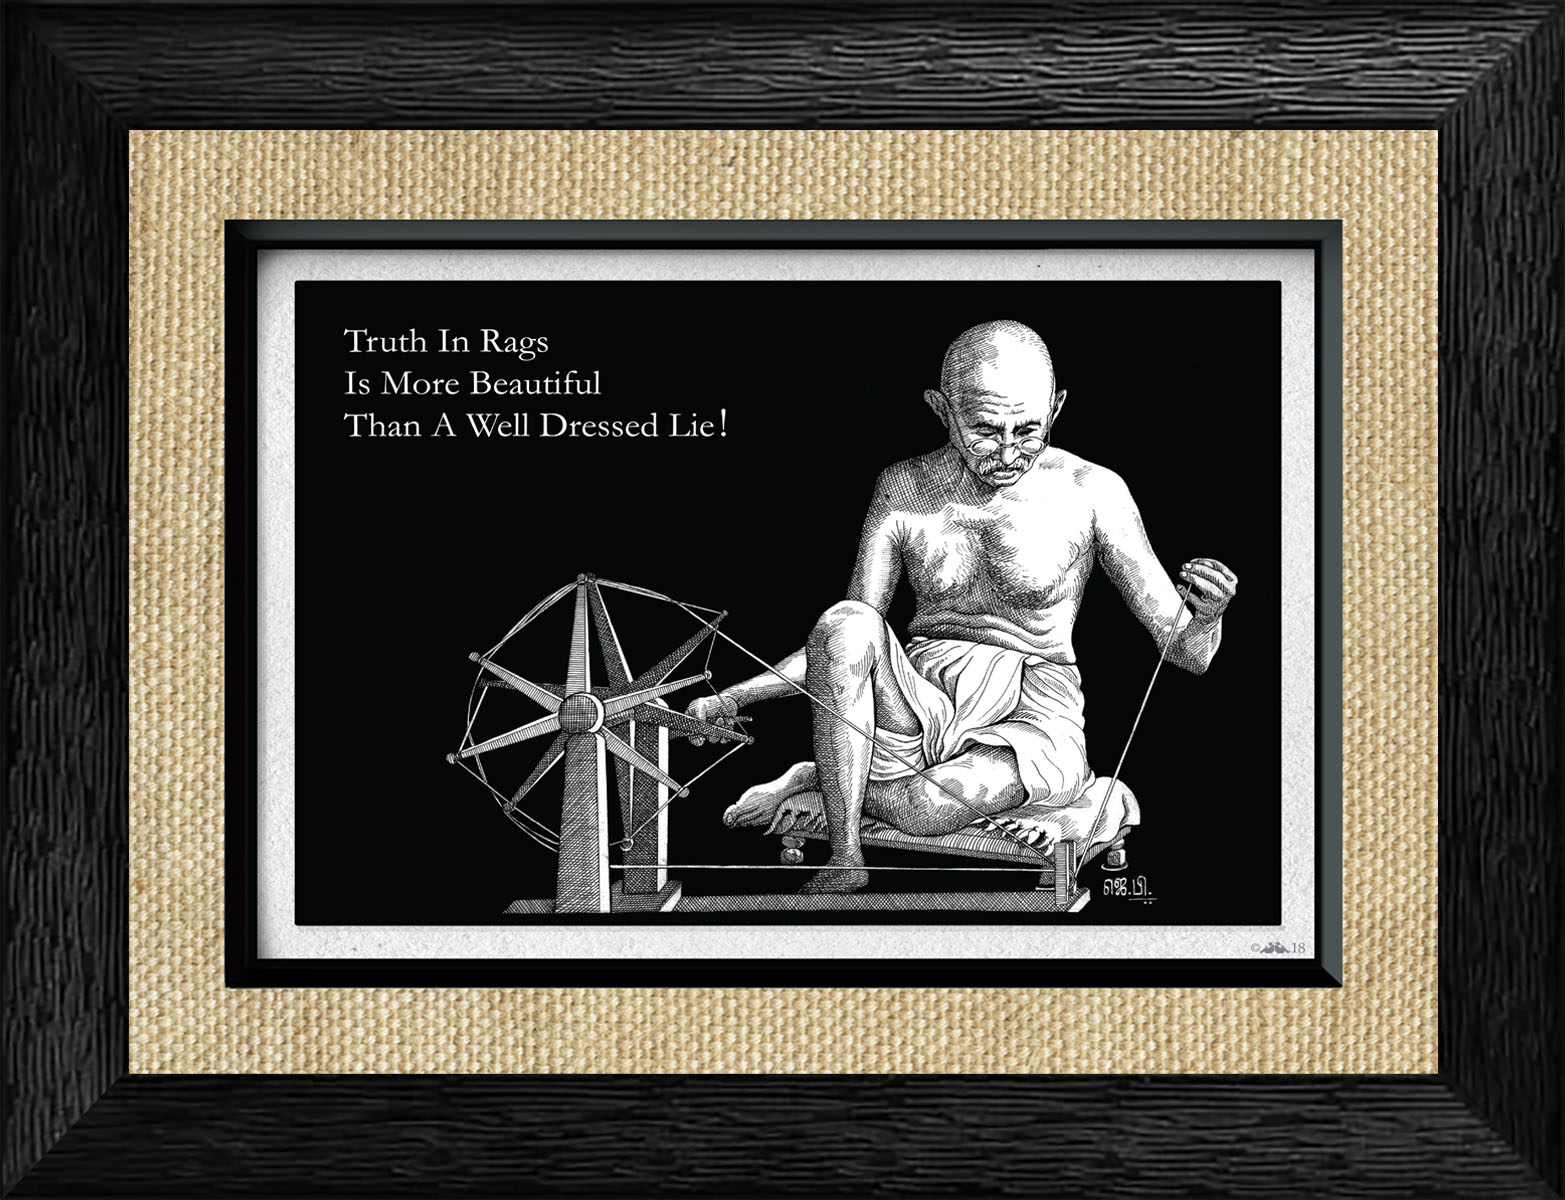 Buy Samriddhi Wall Decor Mahatma Gandhi with Charkha Picture for Office  -and Home Hall Decorative Pictures Online at Low Prices in India - Amazon.in